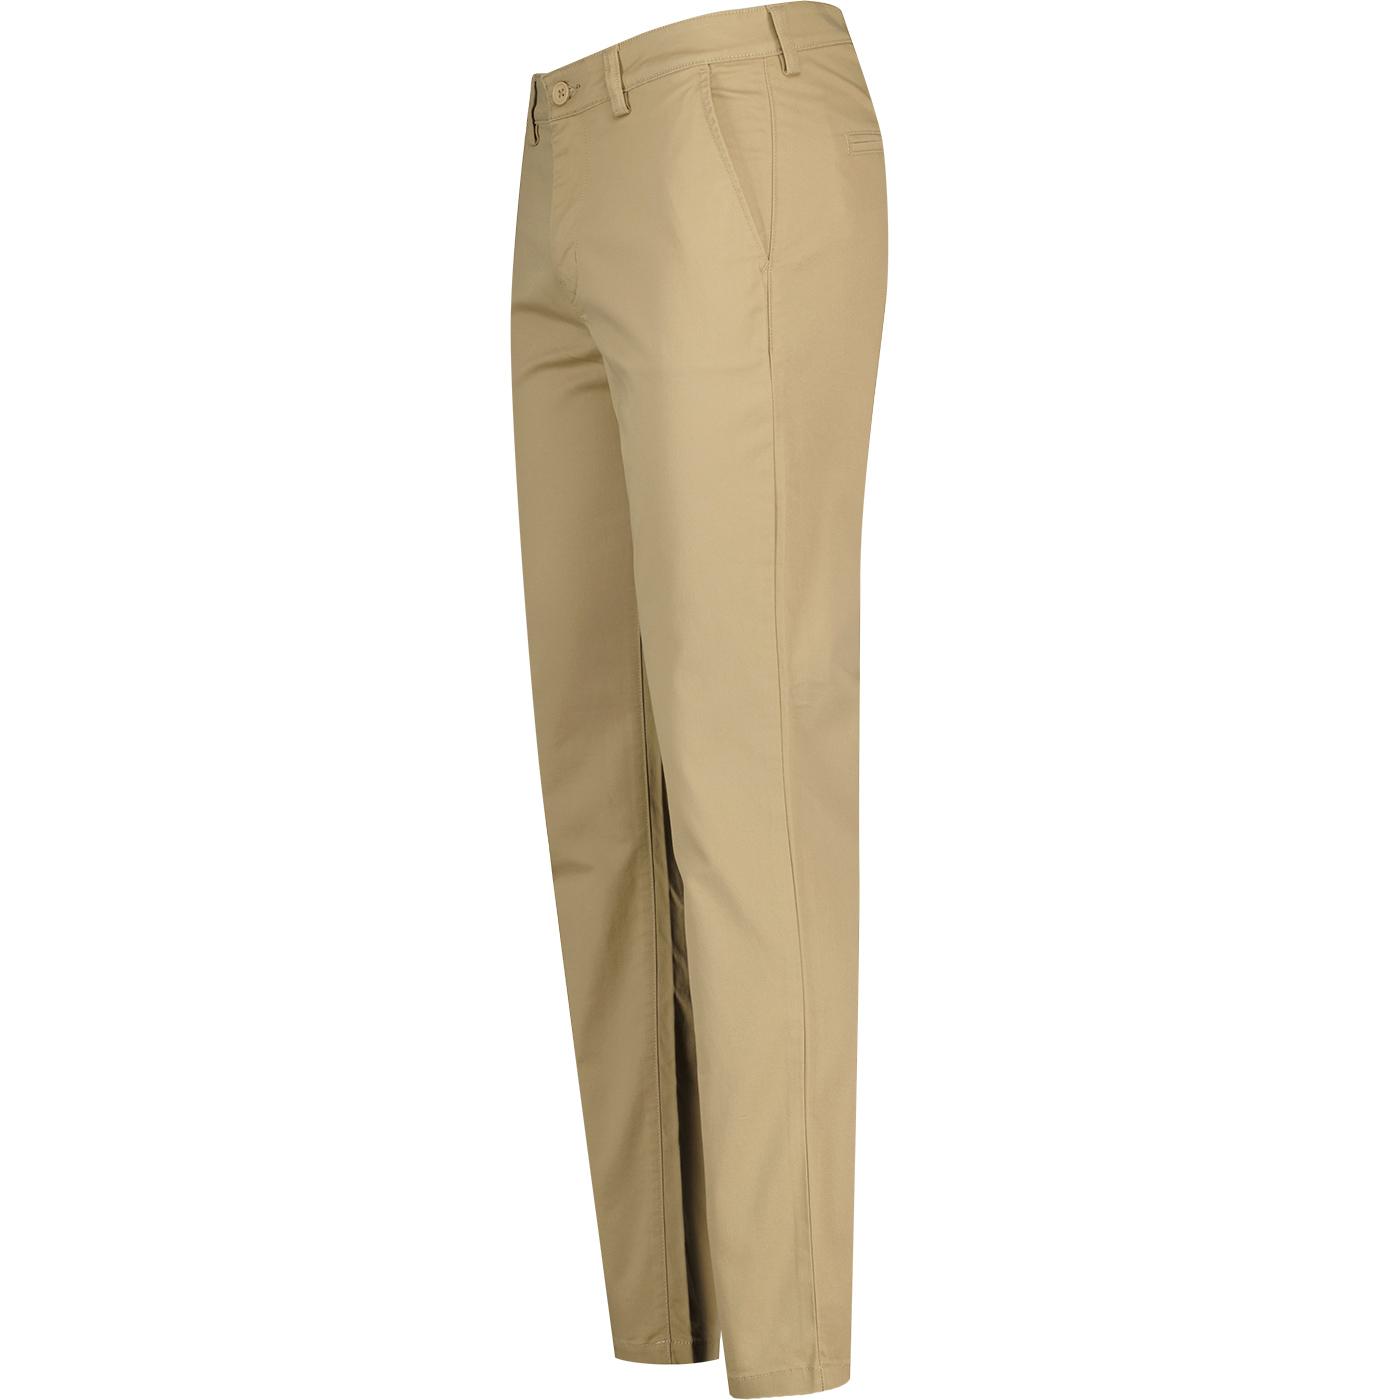 LEE JEANS Retro '50s Slim Fit CHETOPA TWILL Chinos in Clay